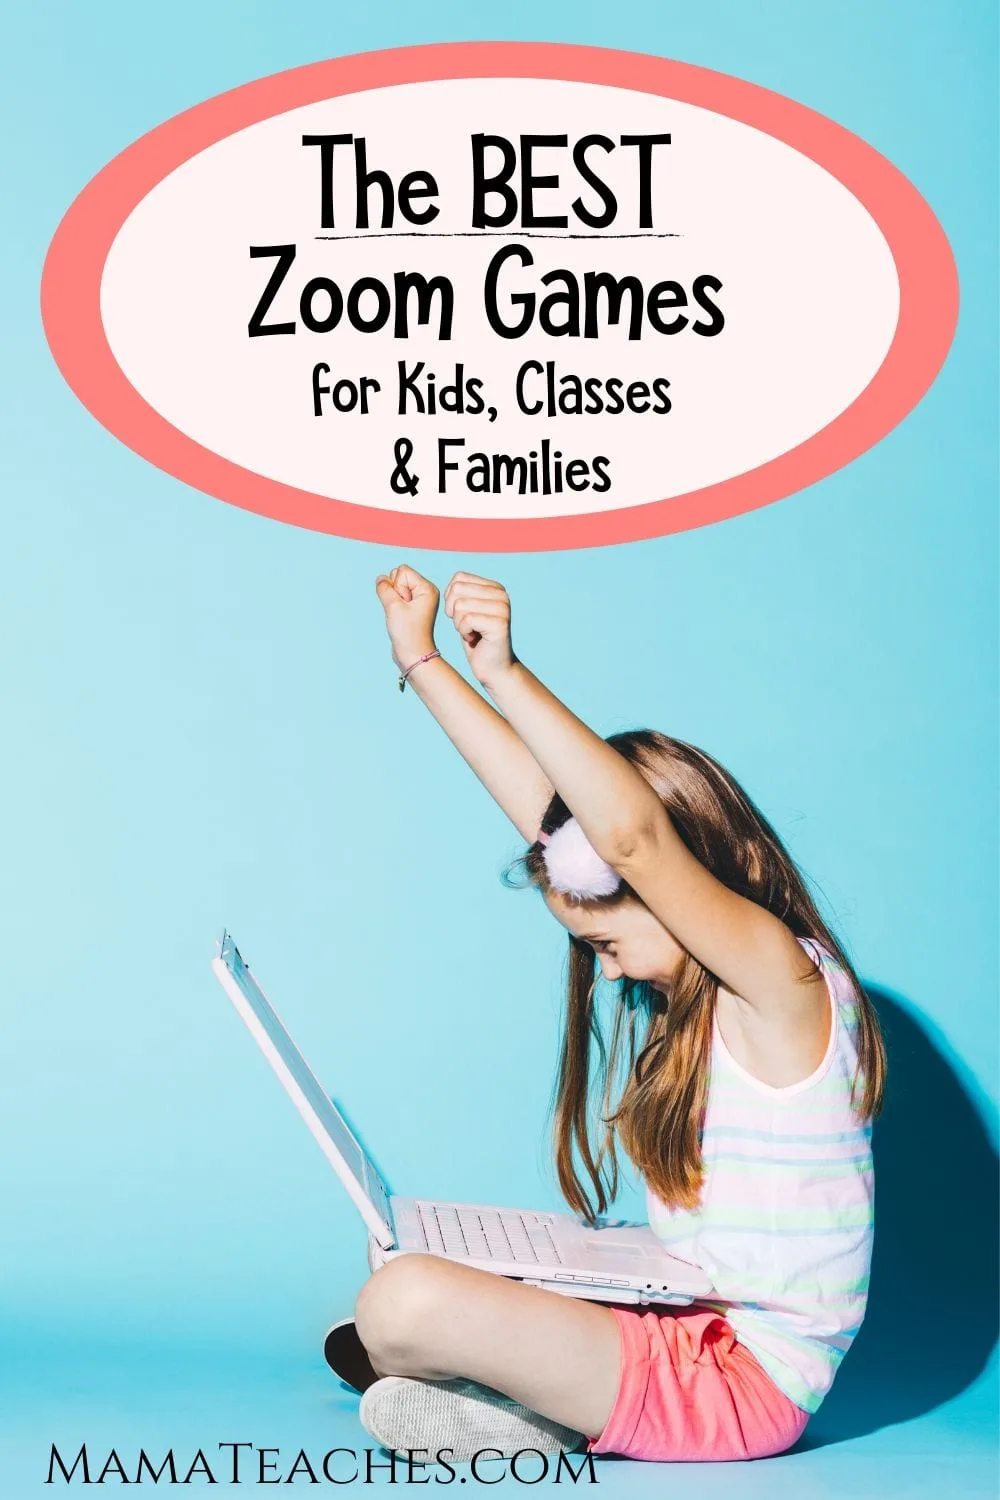 The Best Zoom Games for Kids Classes and Families